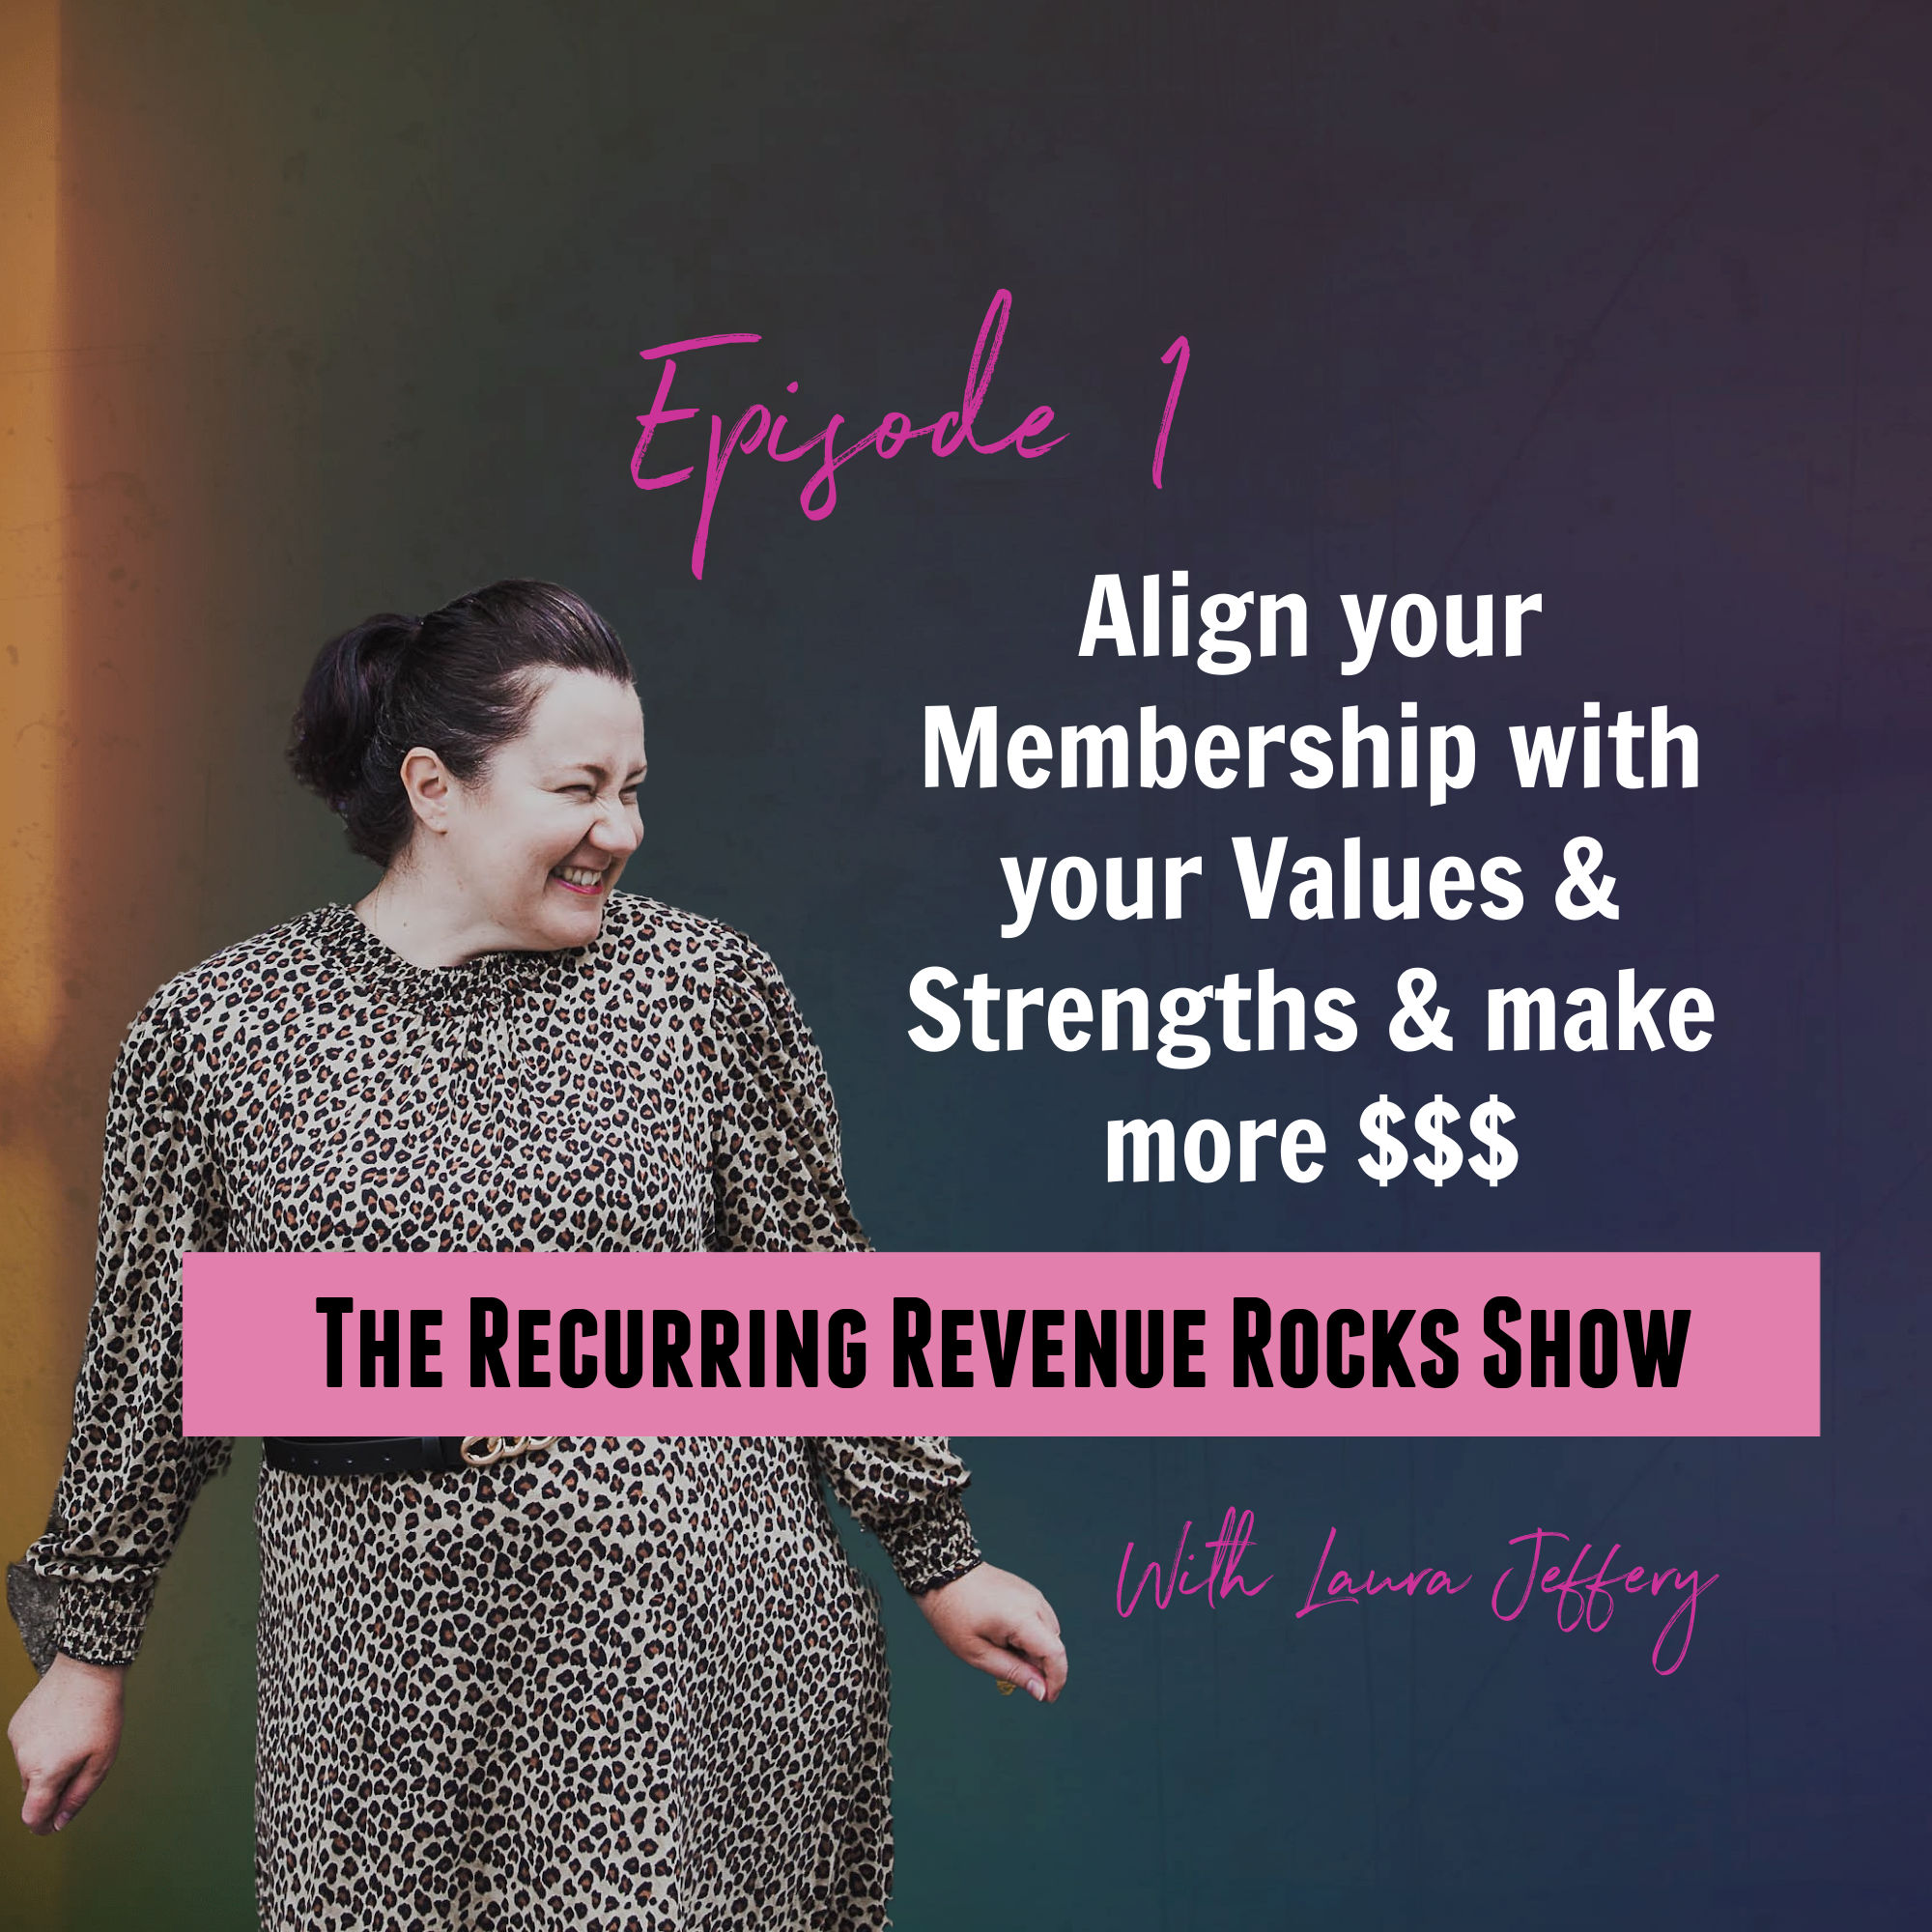 Align your Membership with your Values and Strengths and make more Monthly Revenue in your Business